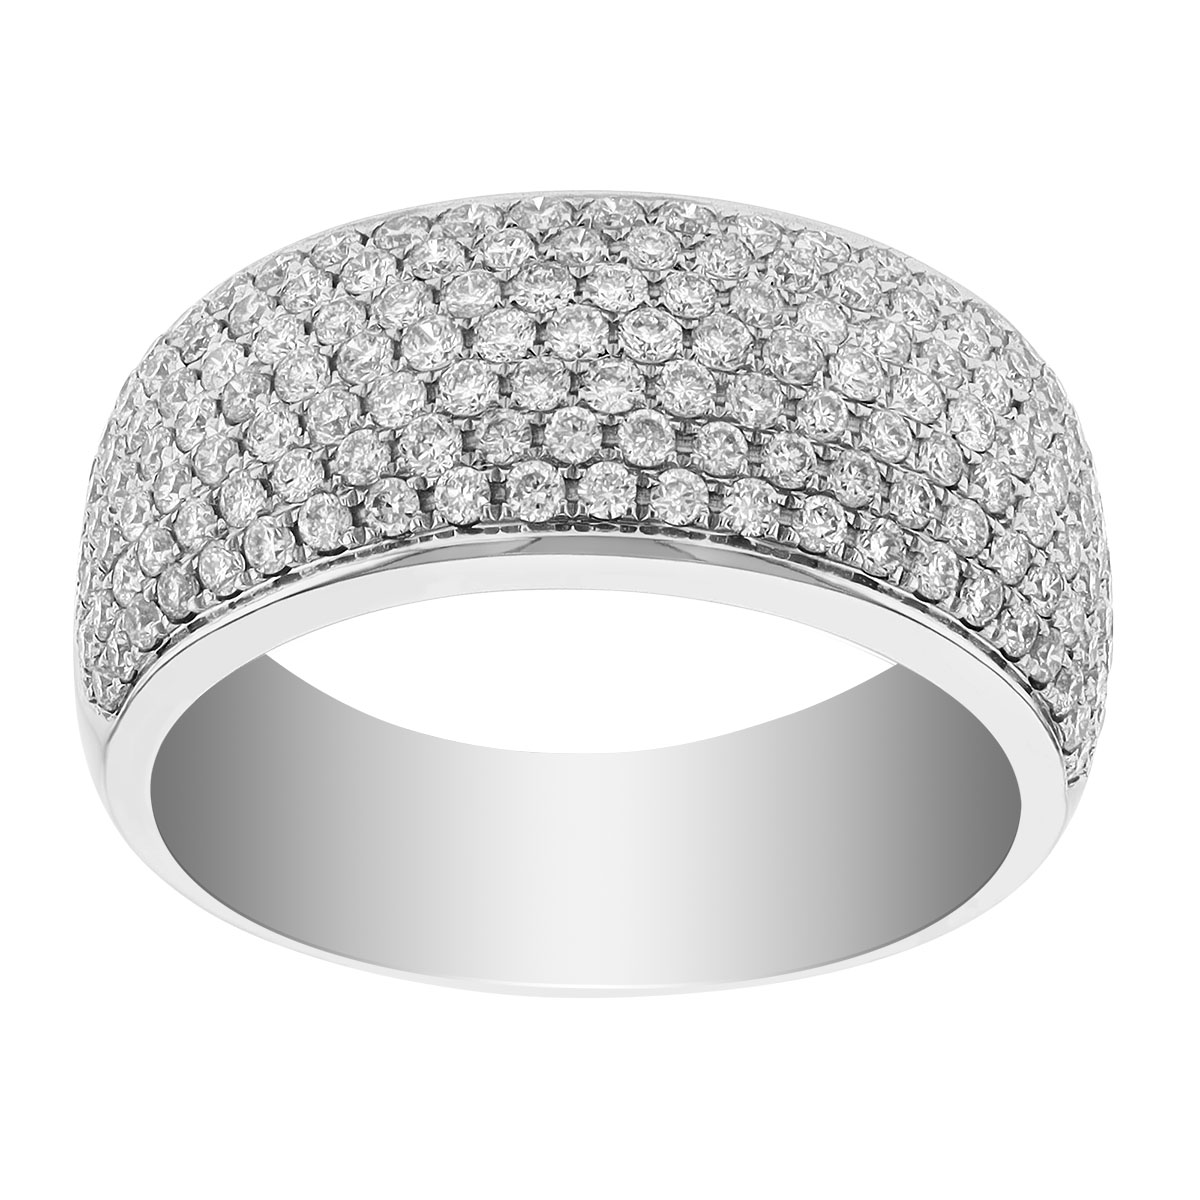 Diamond Pavé Wide Band Ring in White Gold, 1.05 cttw